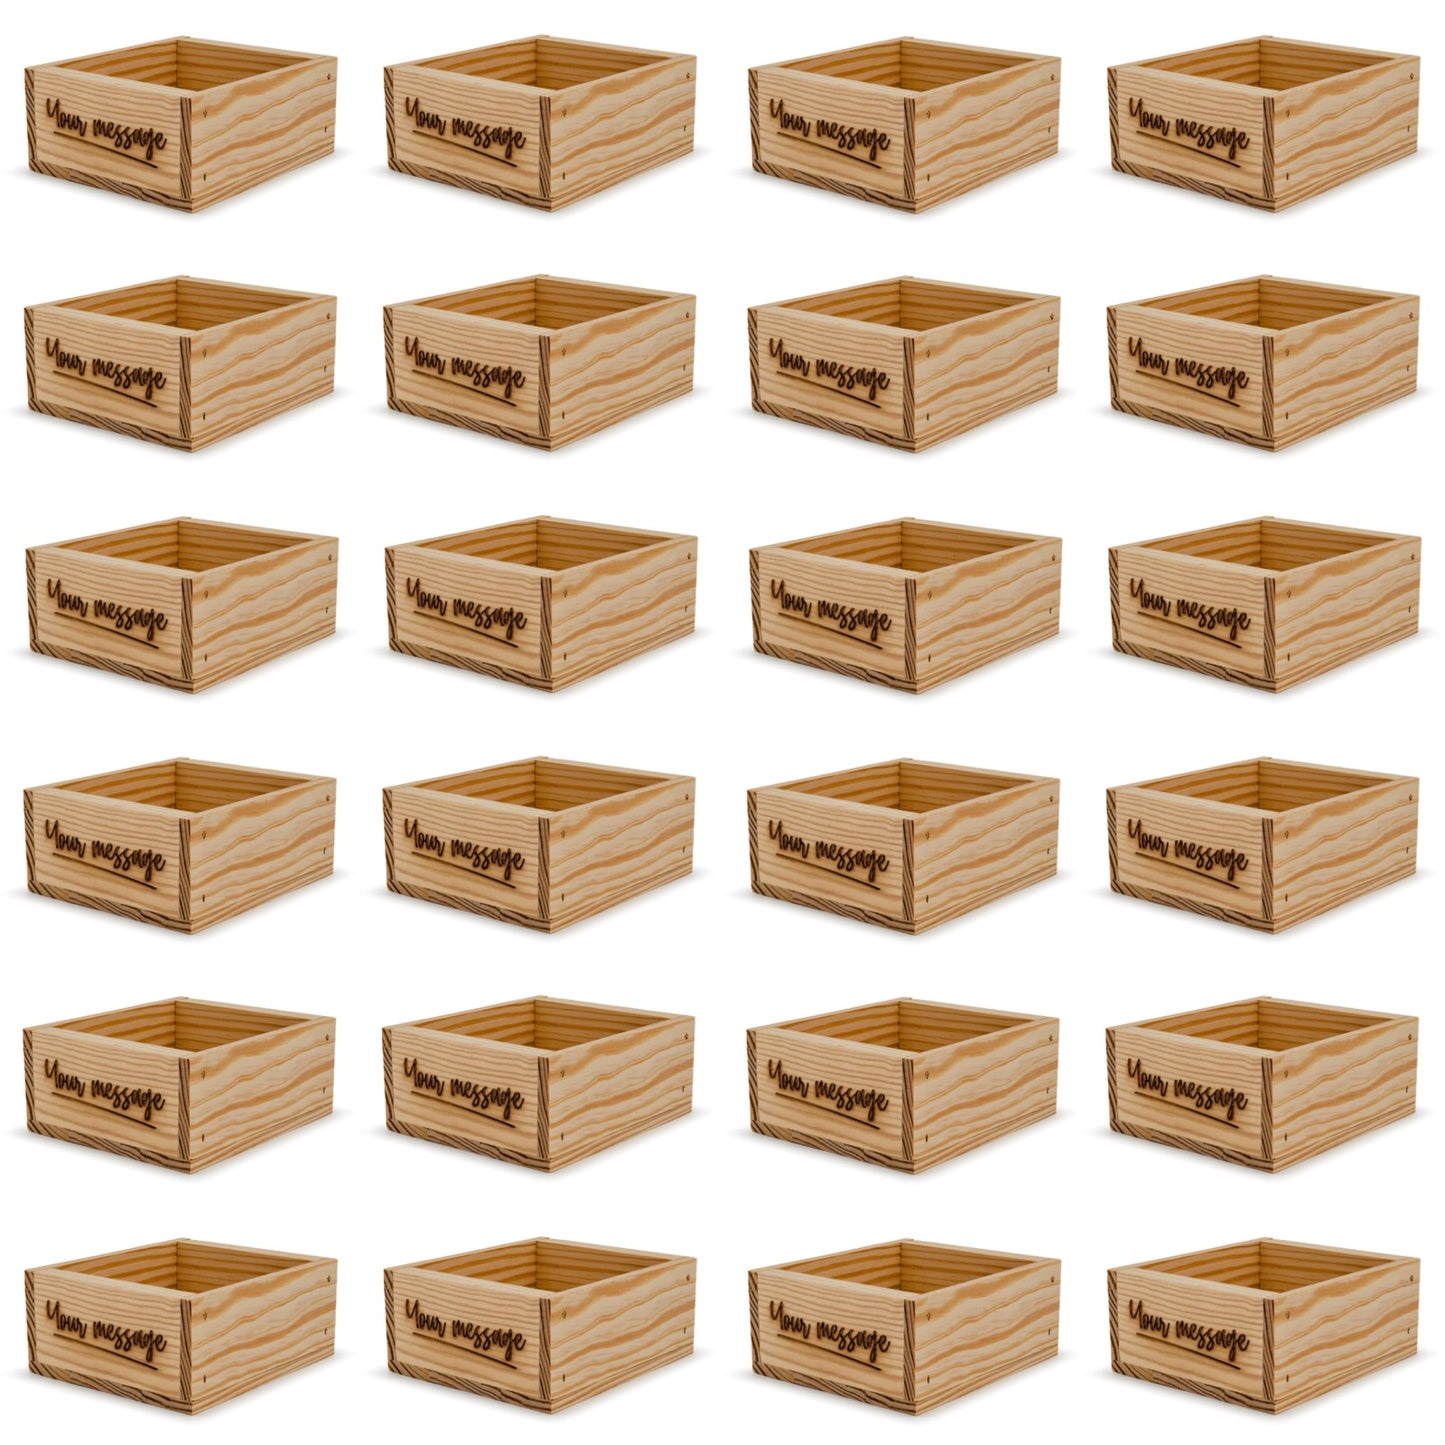 24 Small wooden crates with custom message 6x5.5x2.75